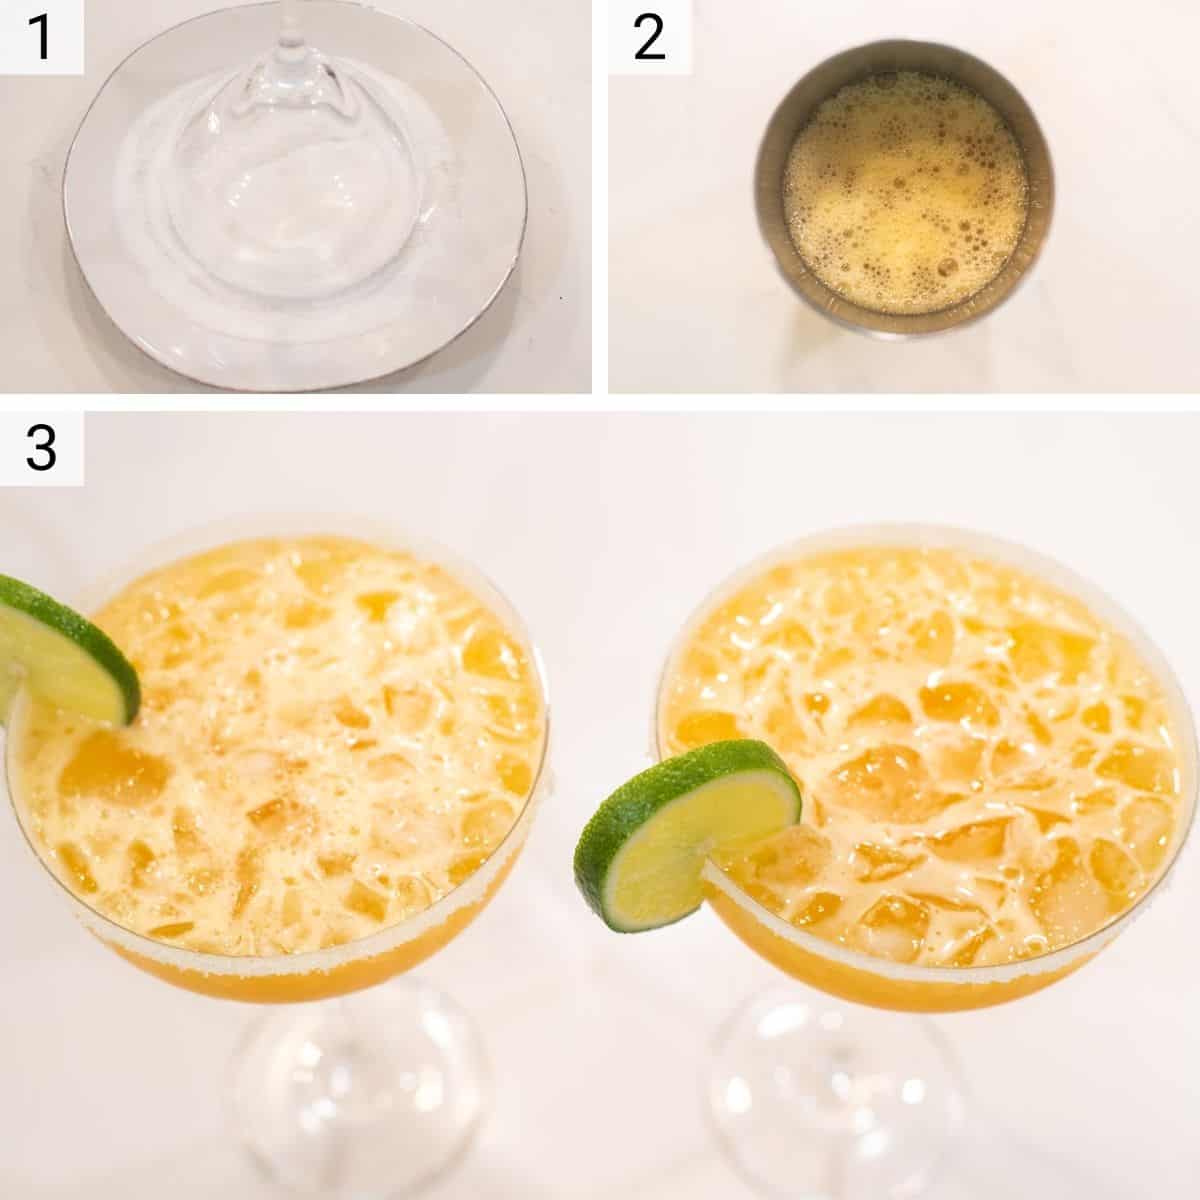 process shots of making margarita with passion fruit